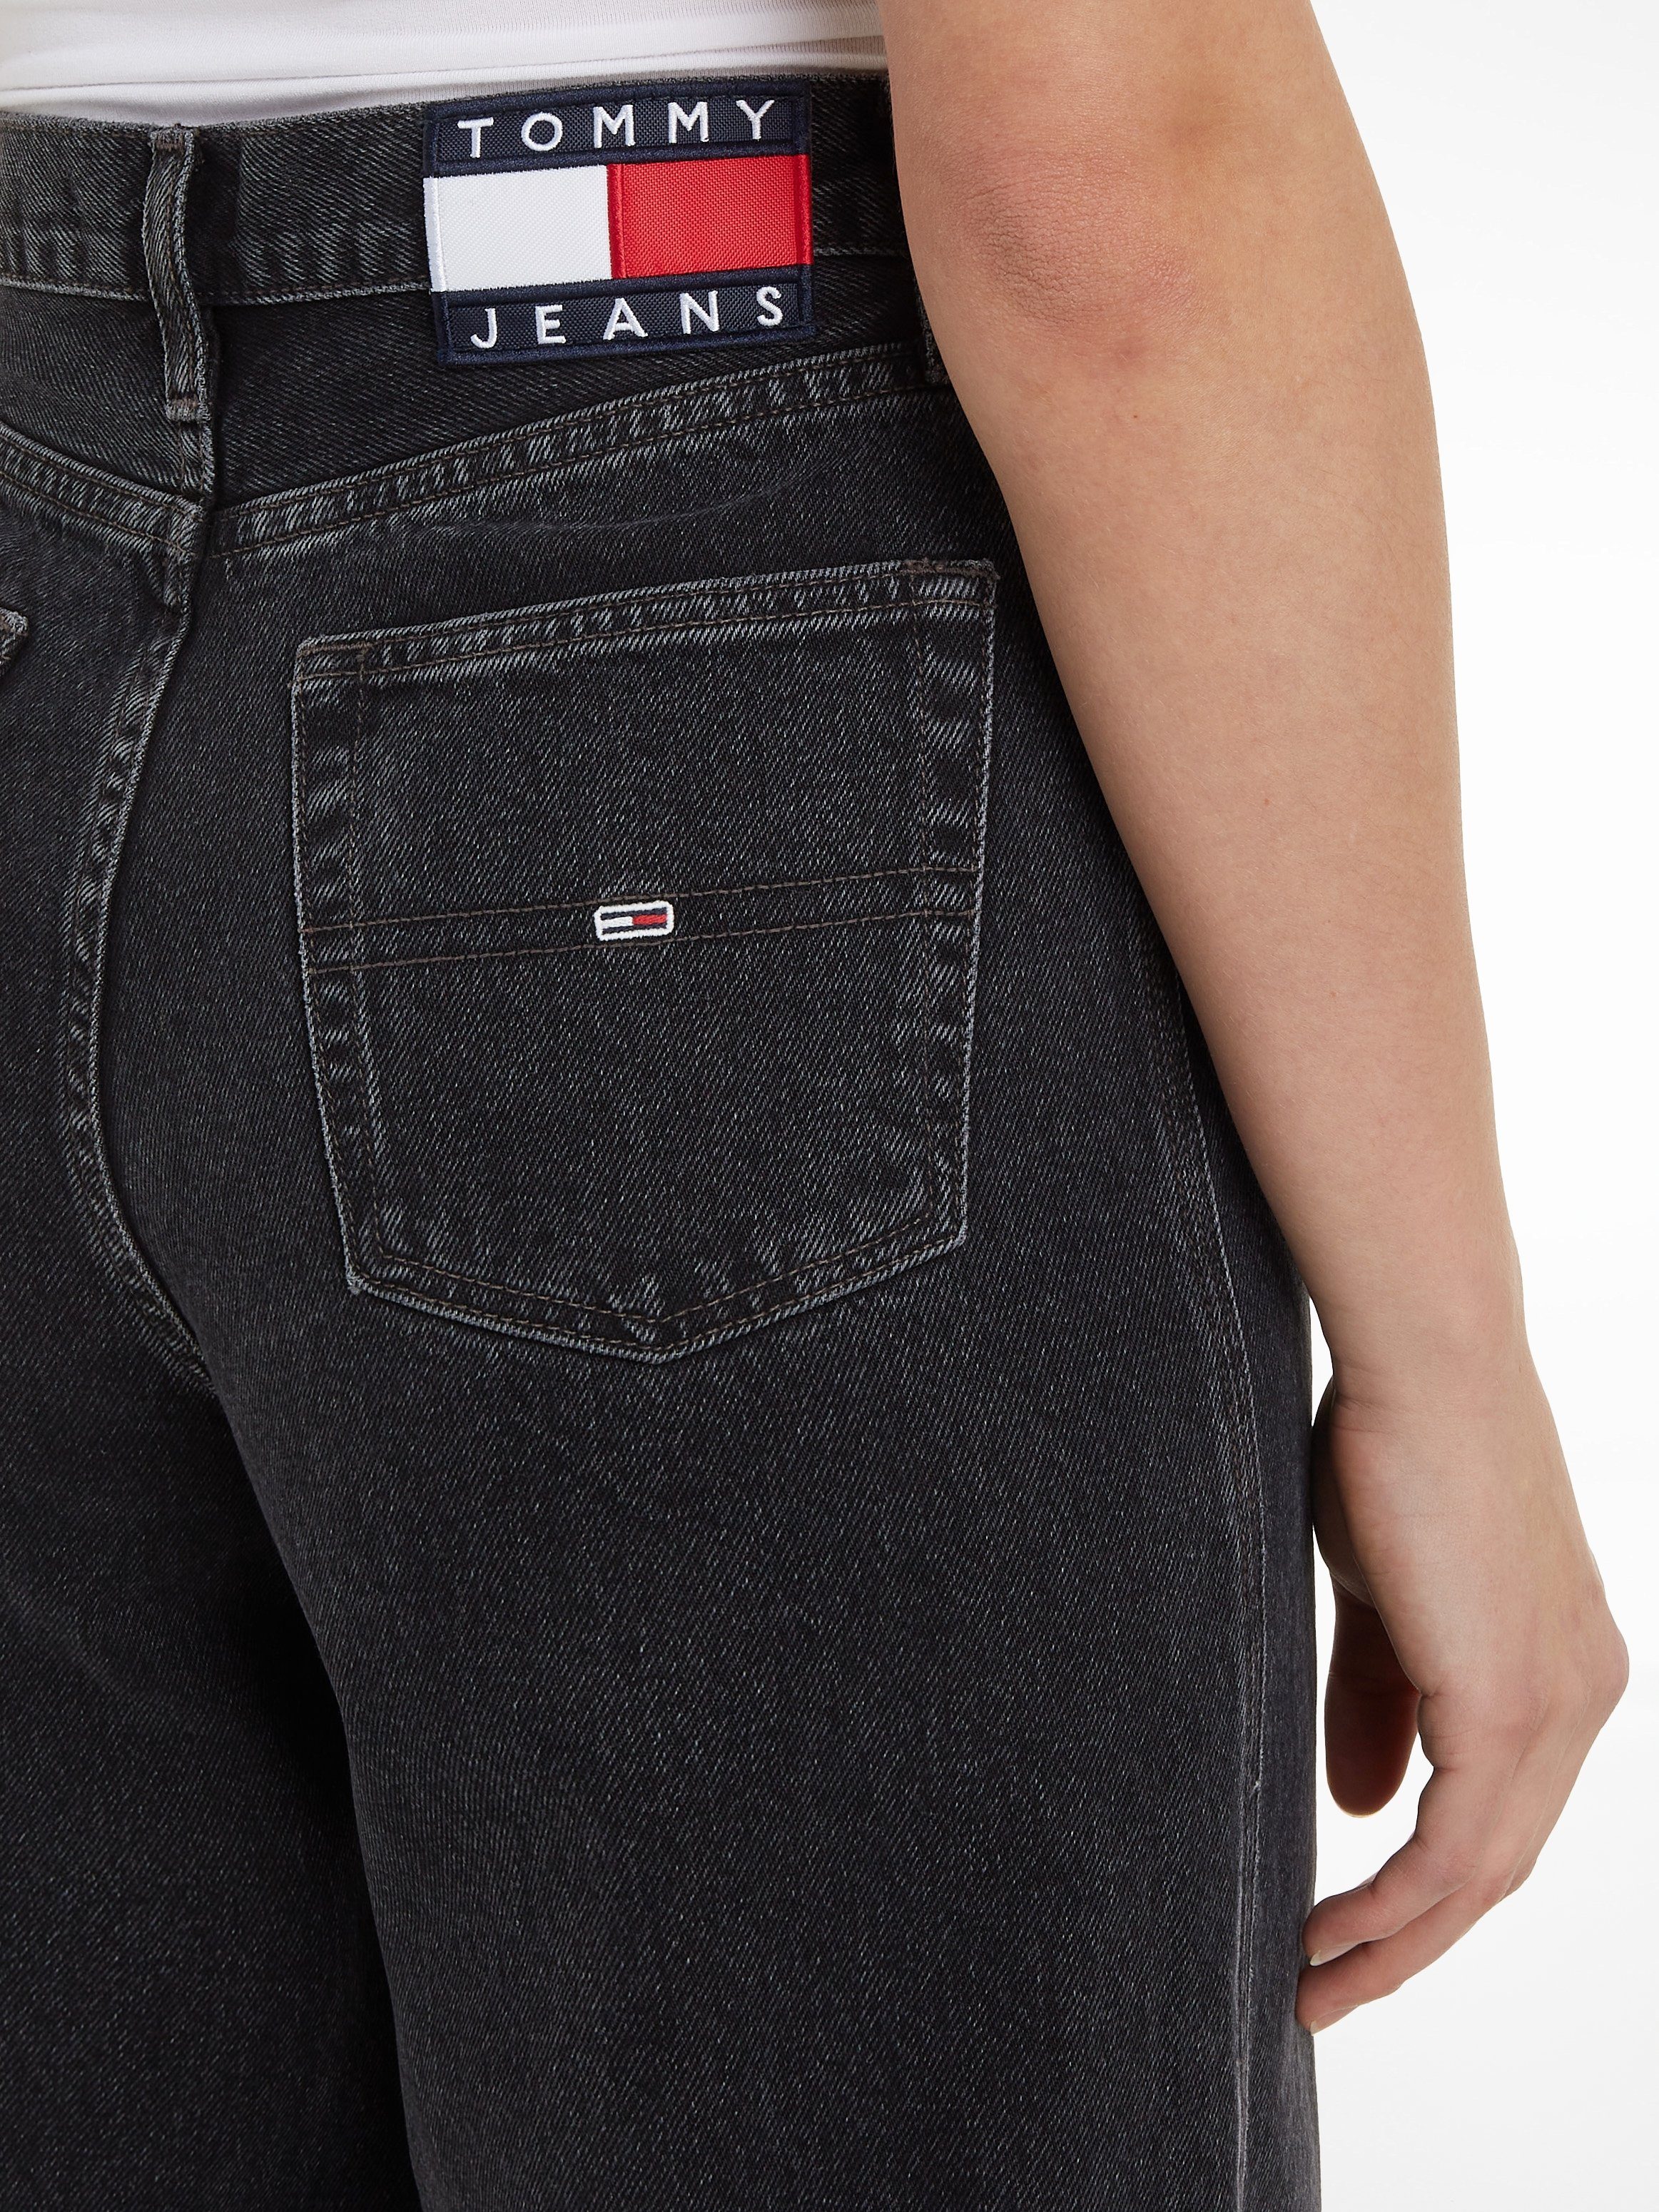 Jeans Jeans Weite Tommy mit Jeans Logobadges Tommy black